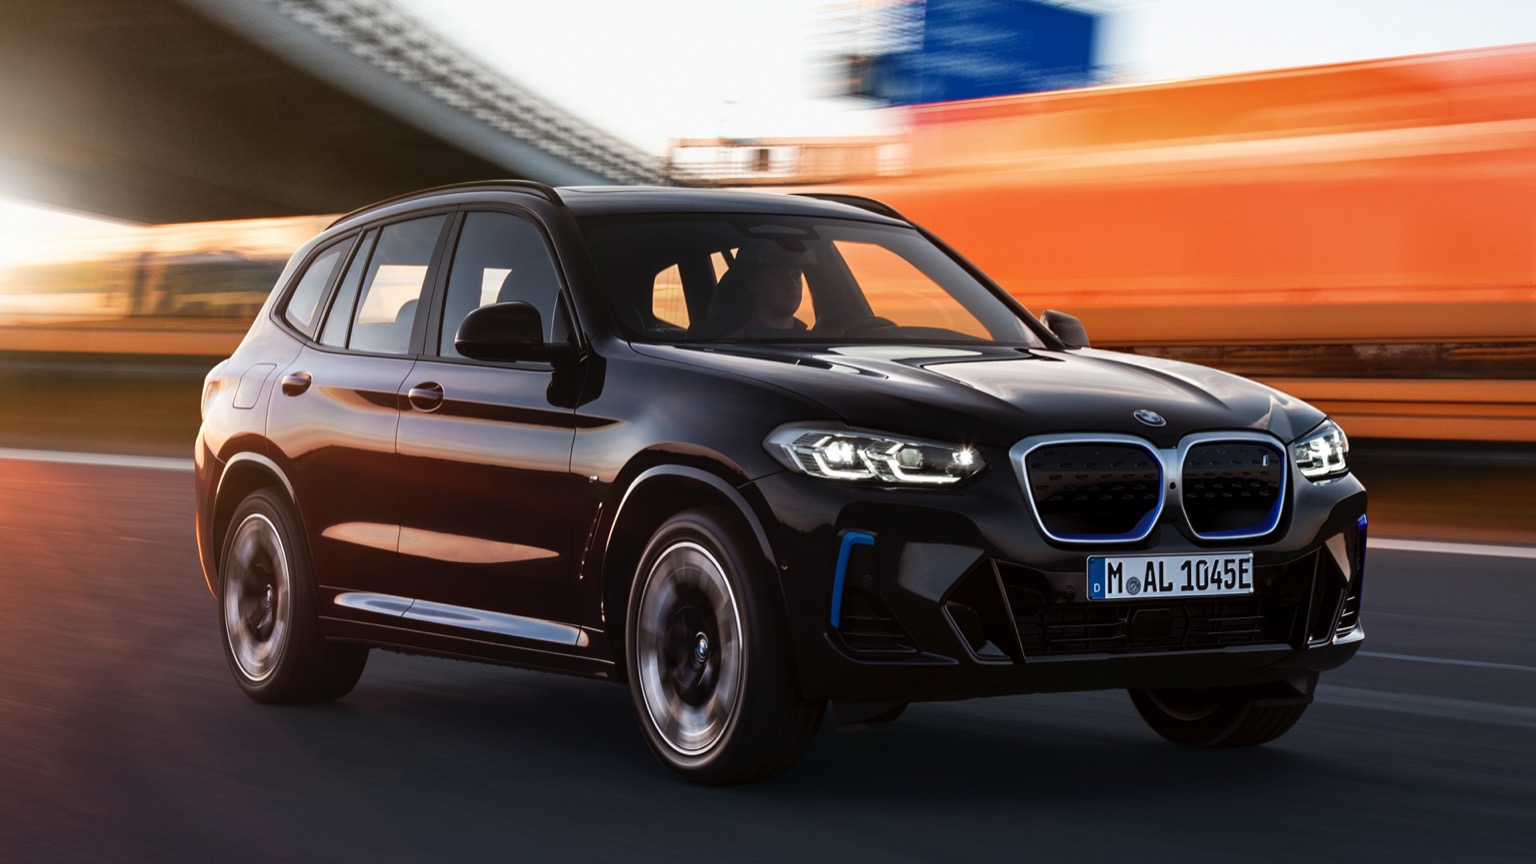 BMW IX3 electric car pricing , review & feature